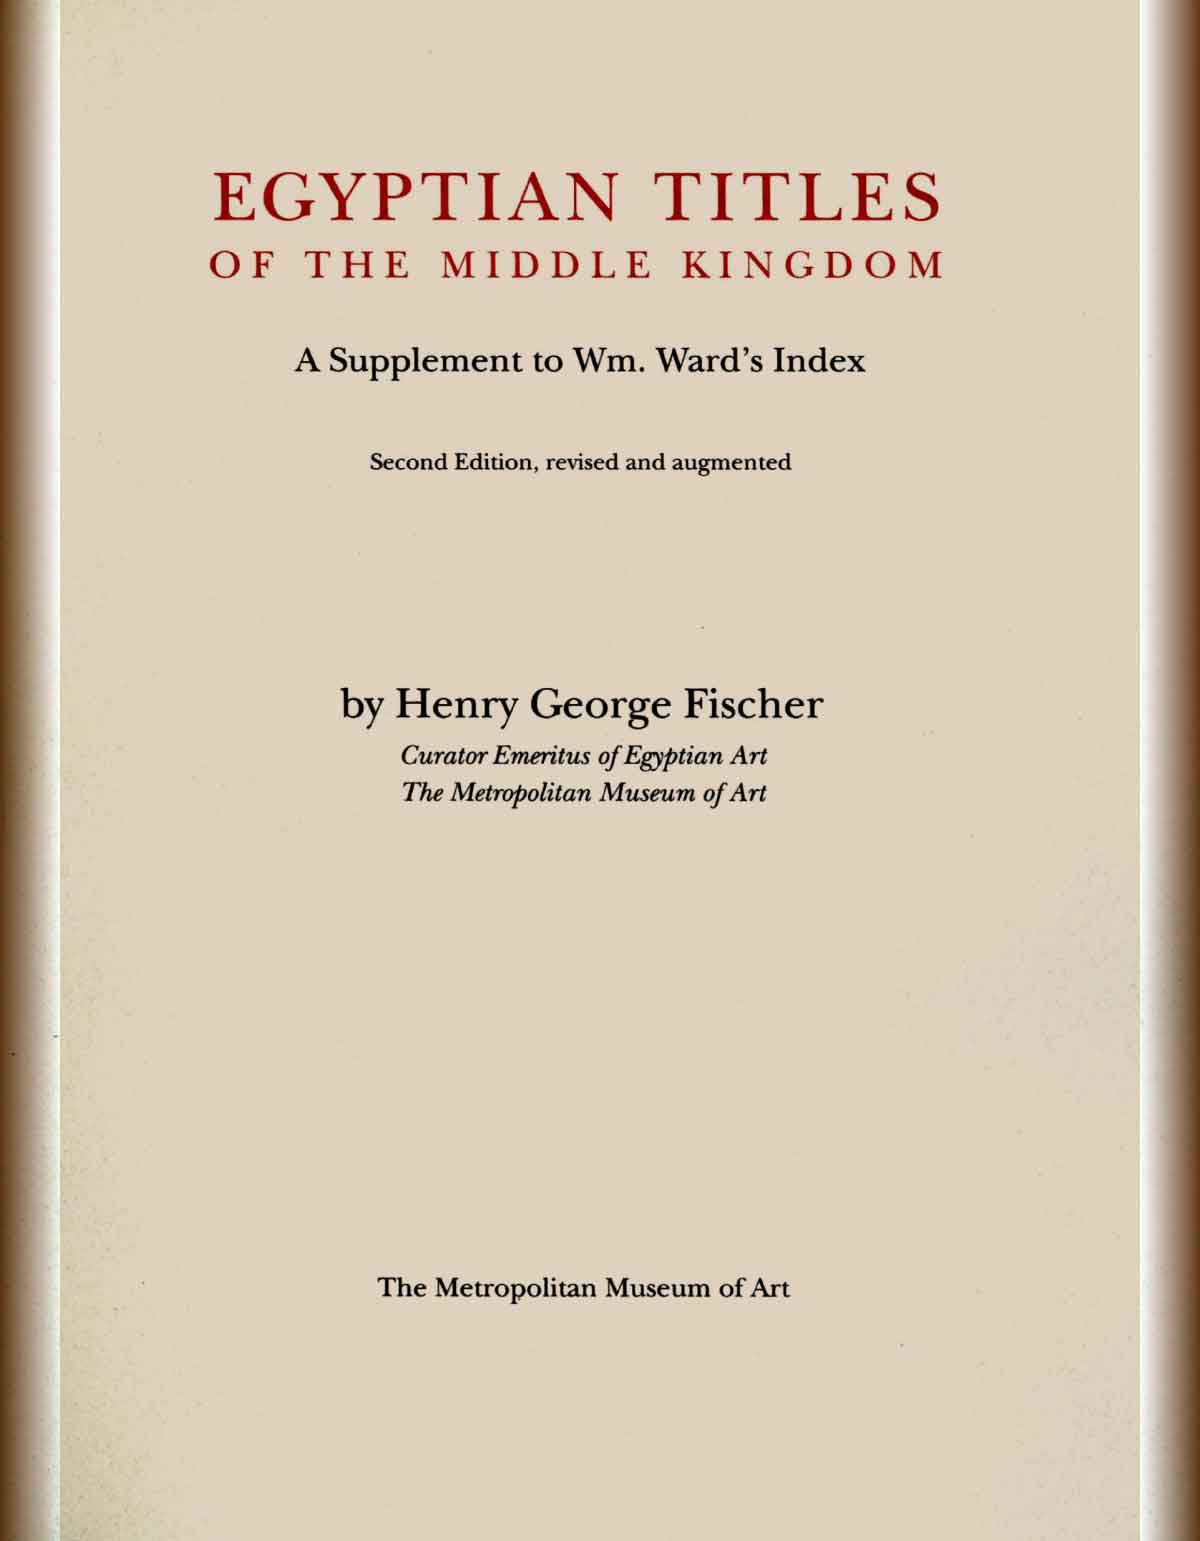 Egyptian_Titles_of_the_Middle_Kingdom_A_Supplement_to_Wm_Wards_Index-cover